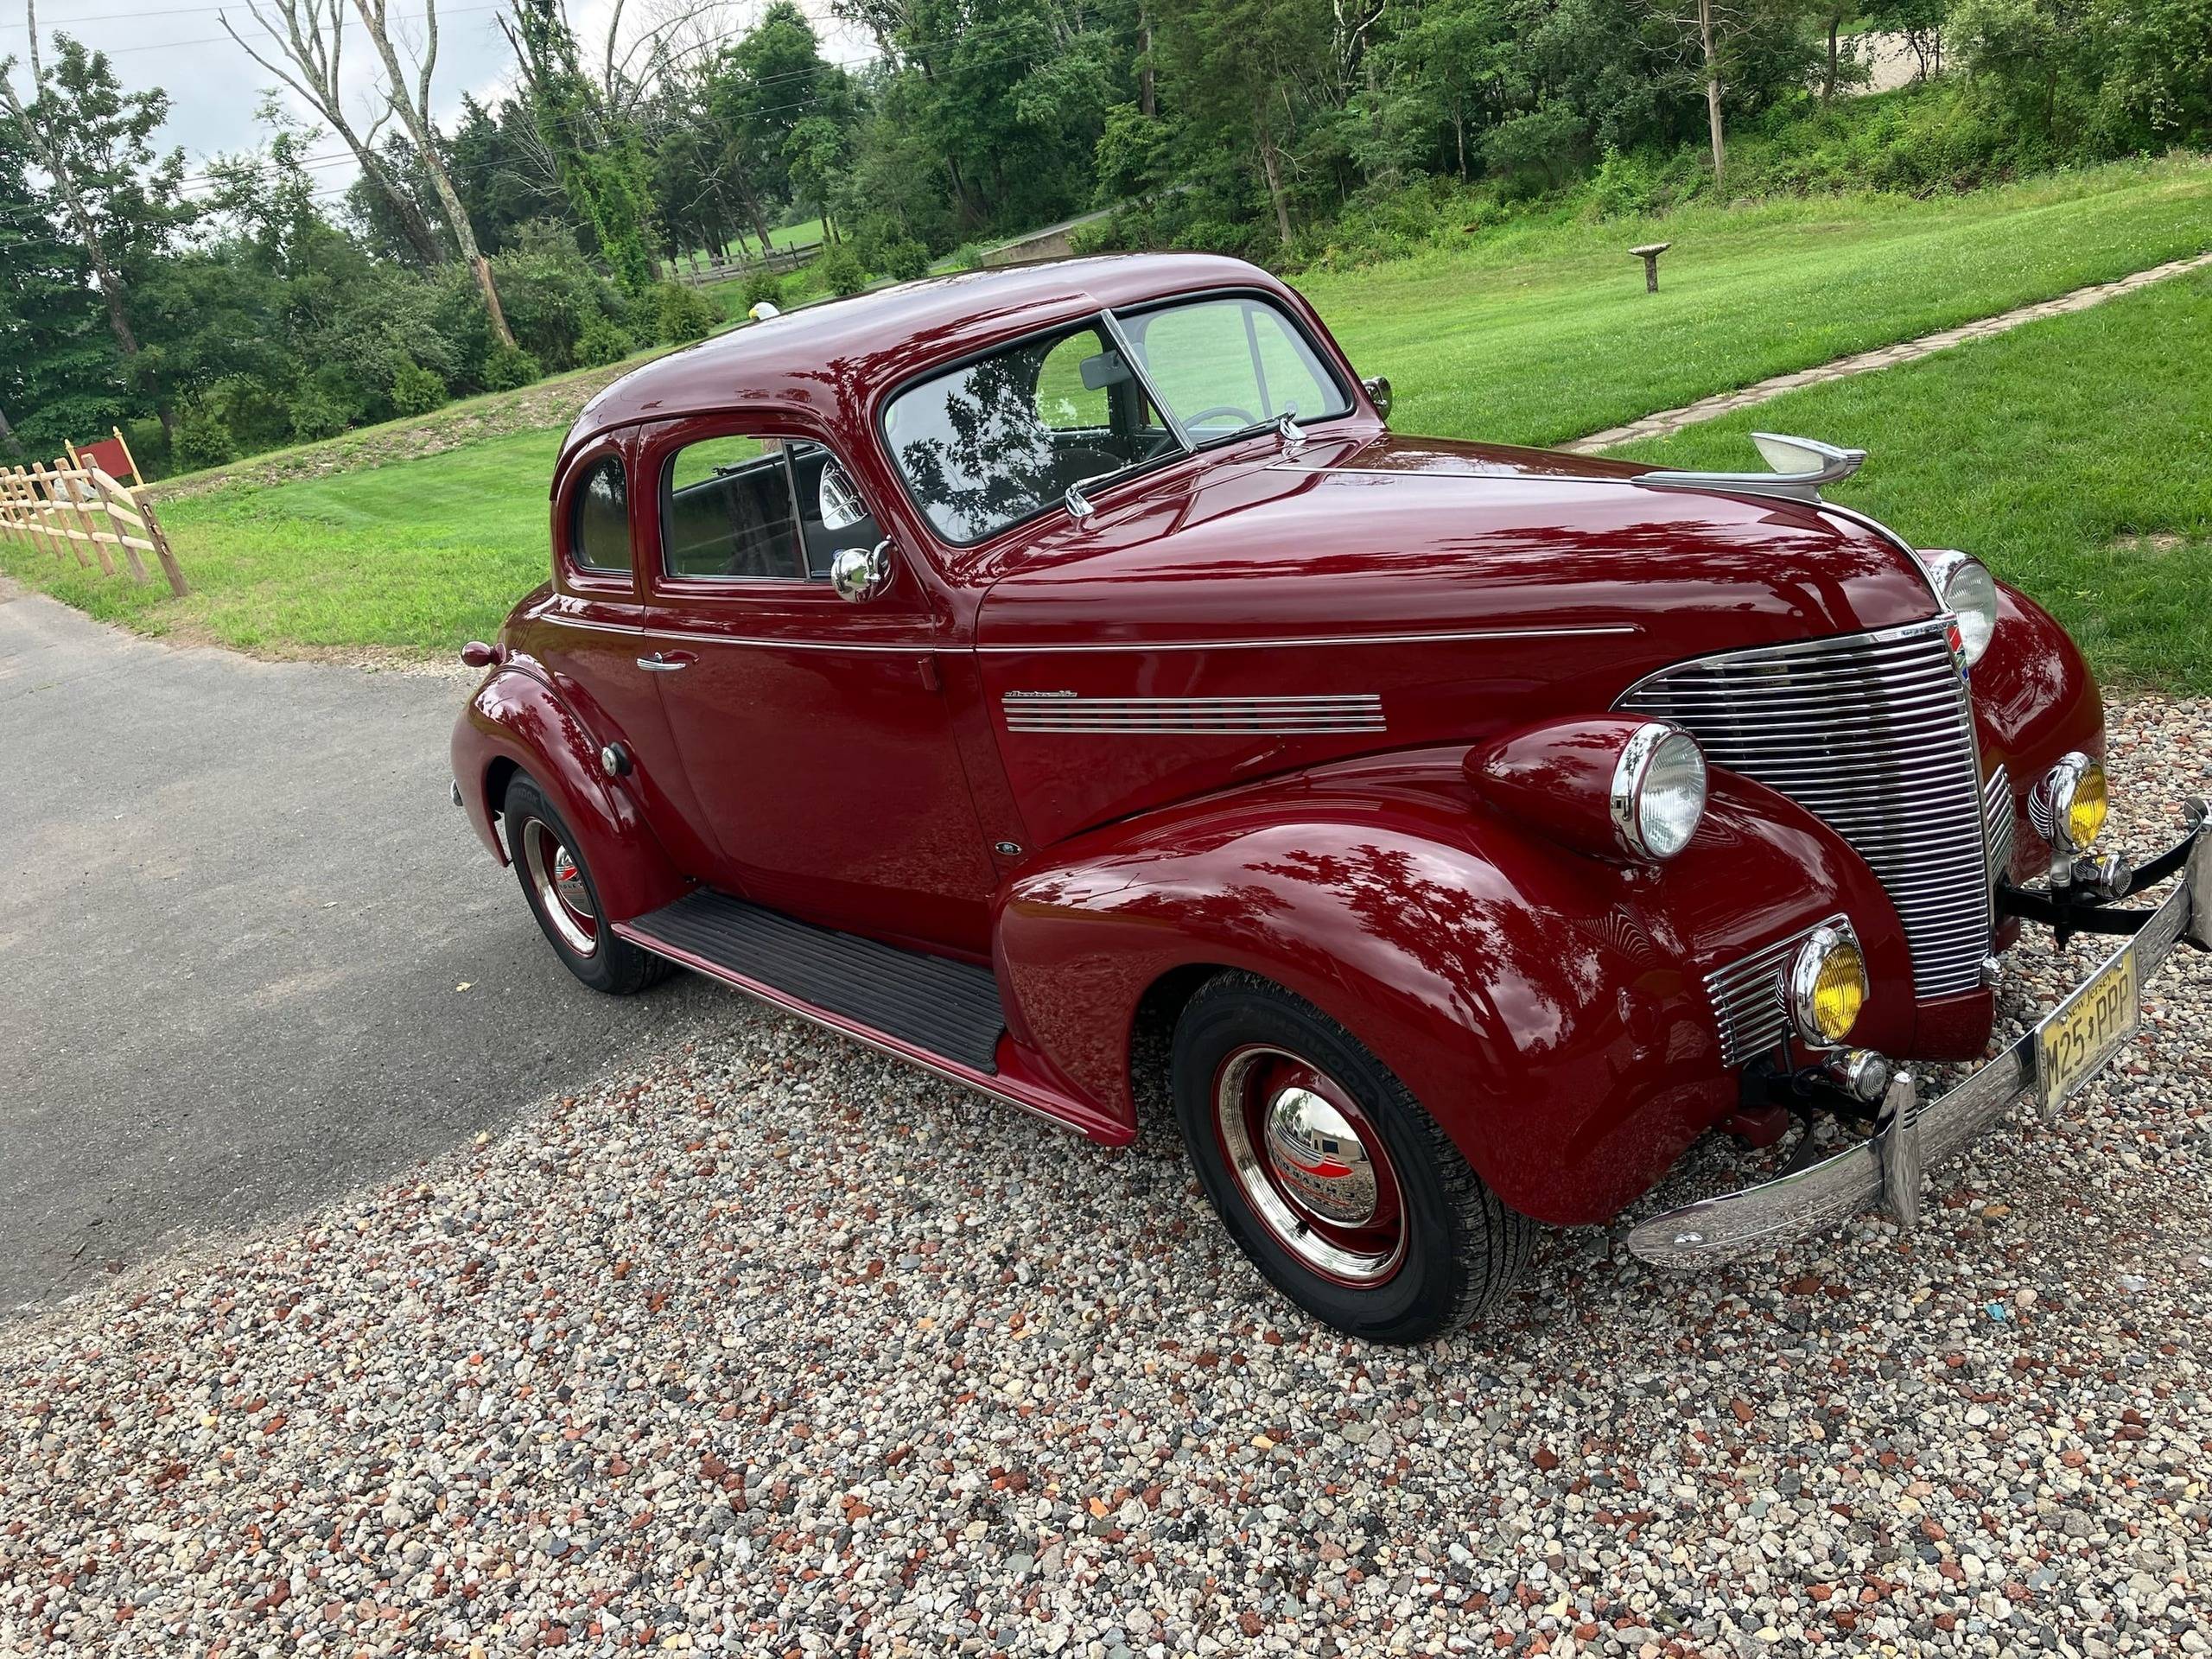 1939 Chevrolet Master 85 business coupe 1